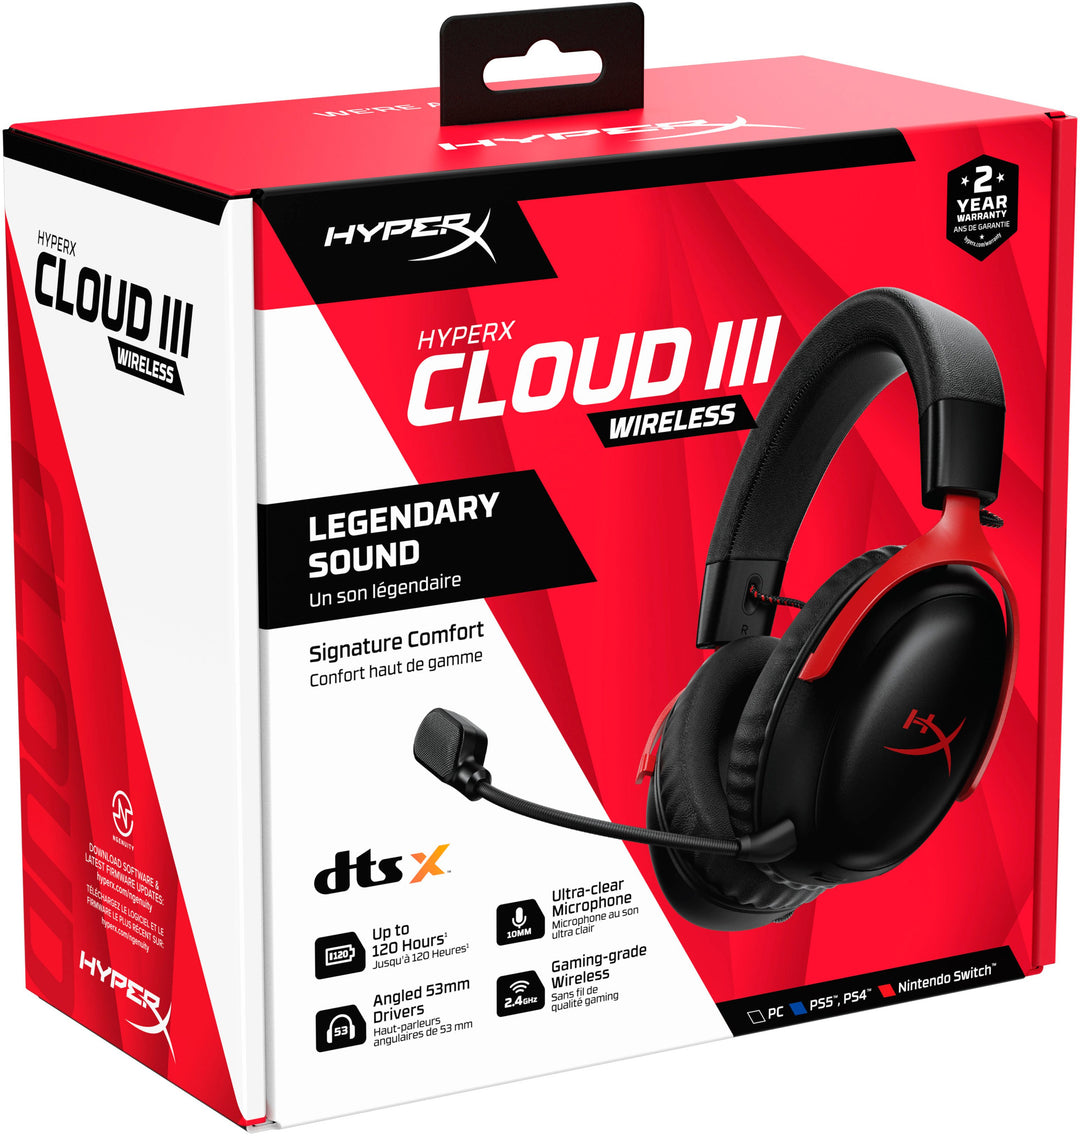 HyperX - Cloud III Wireless Gaming Headset for PC, PS5, and PS4 - Black/Red_4